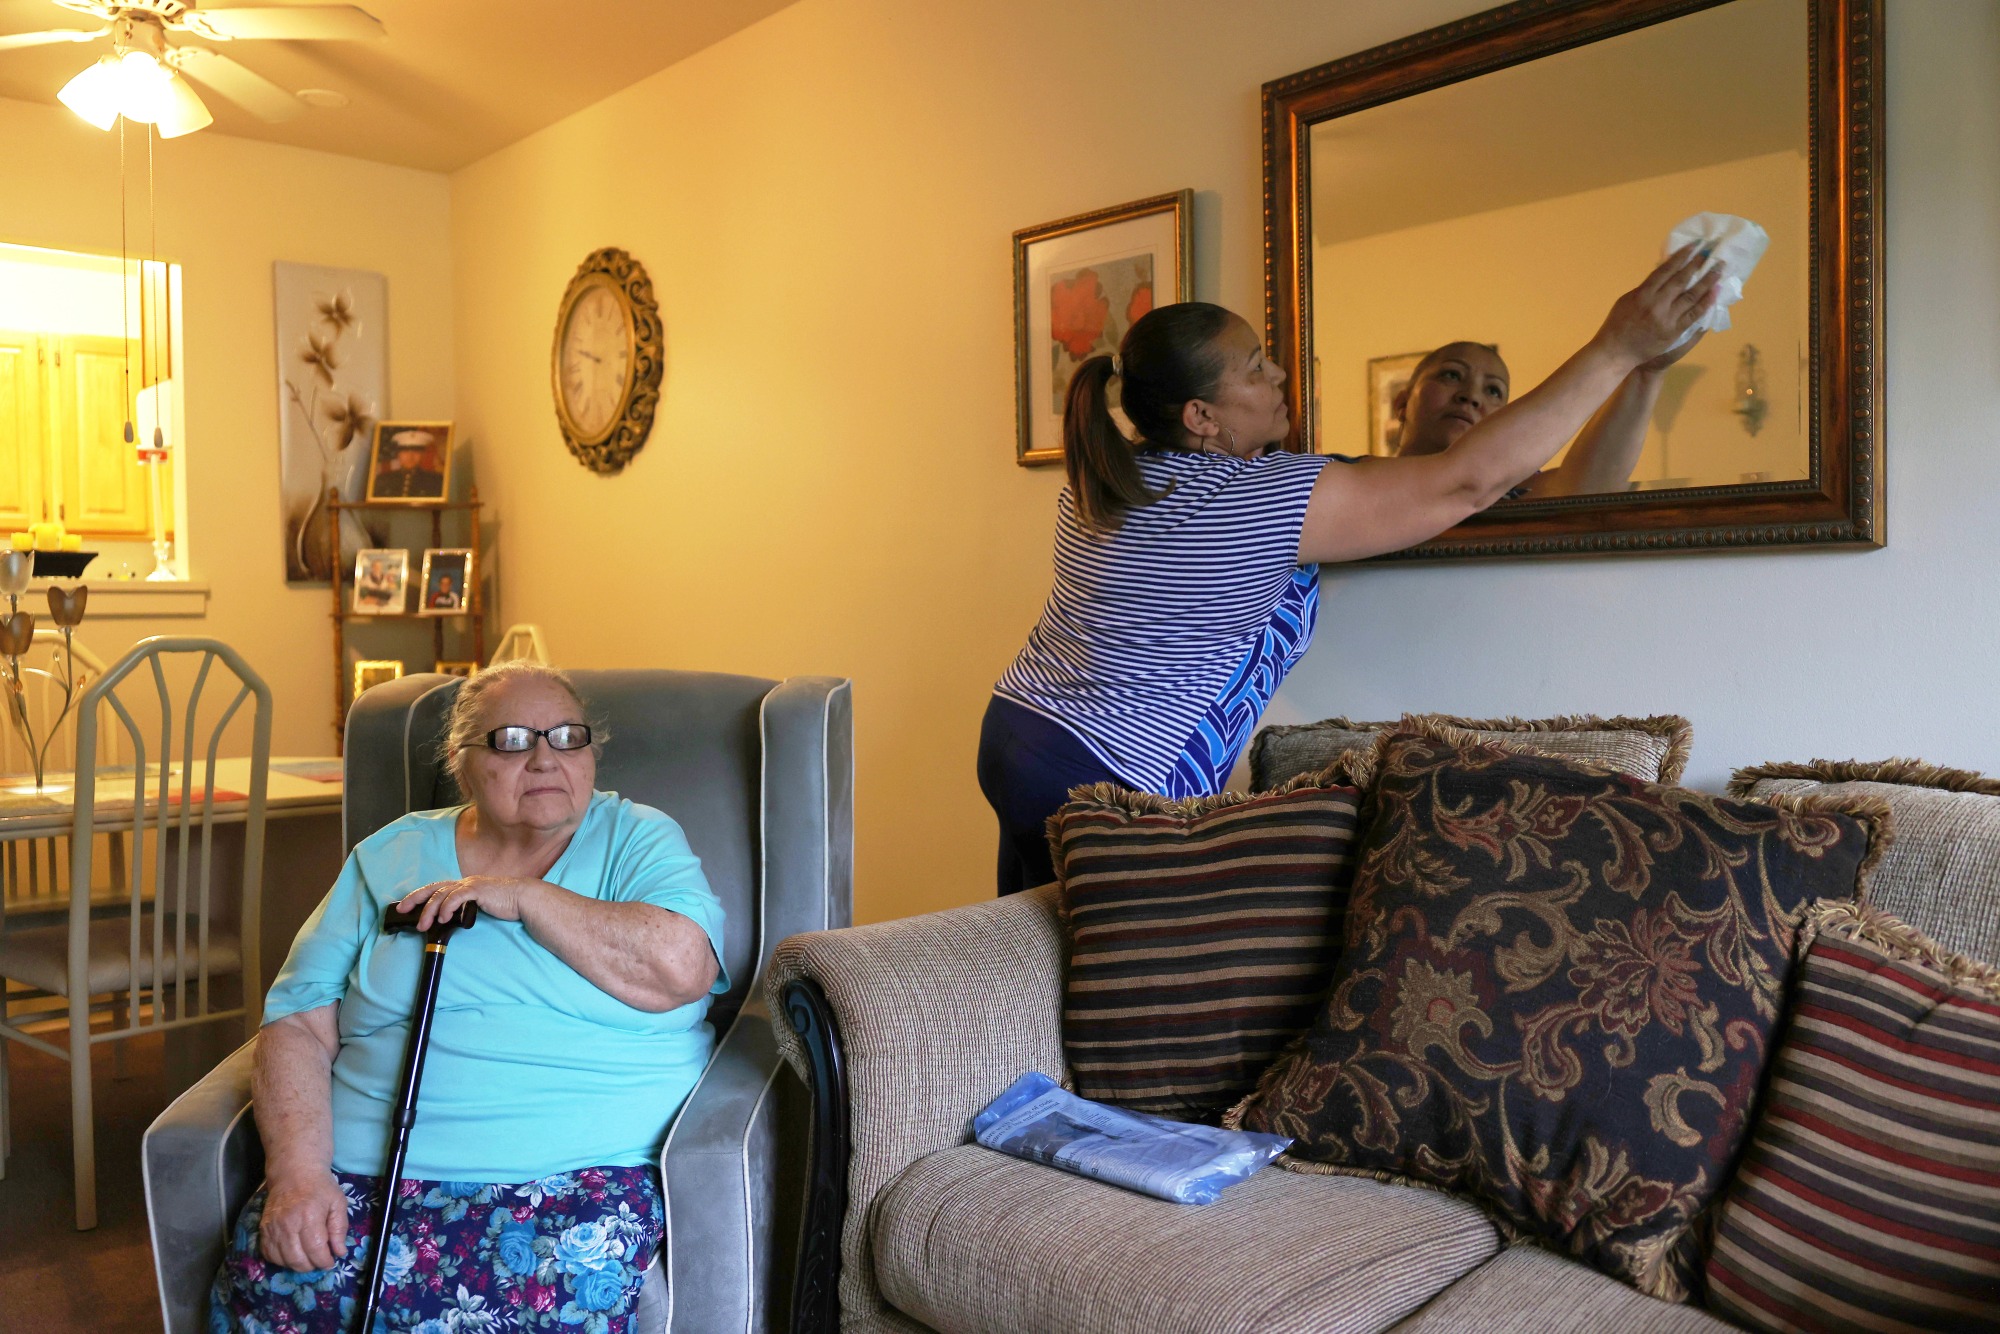 Tackling Latino health, caregiving and housing is key as older population grows